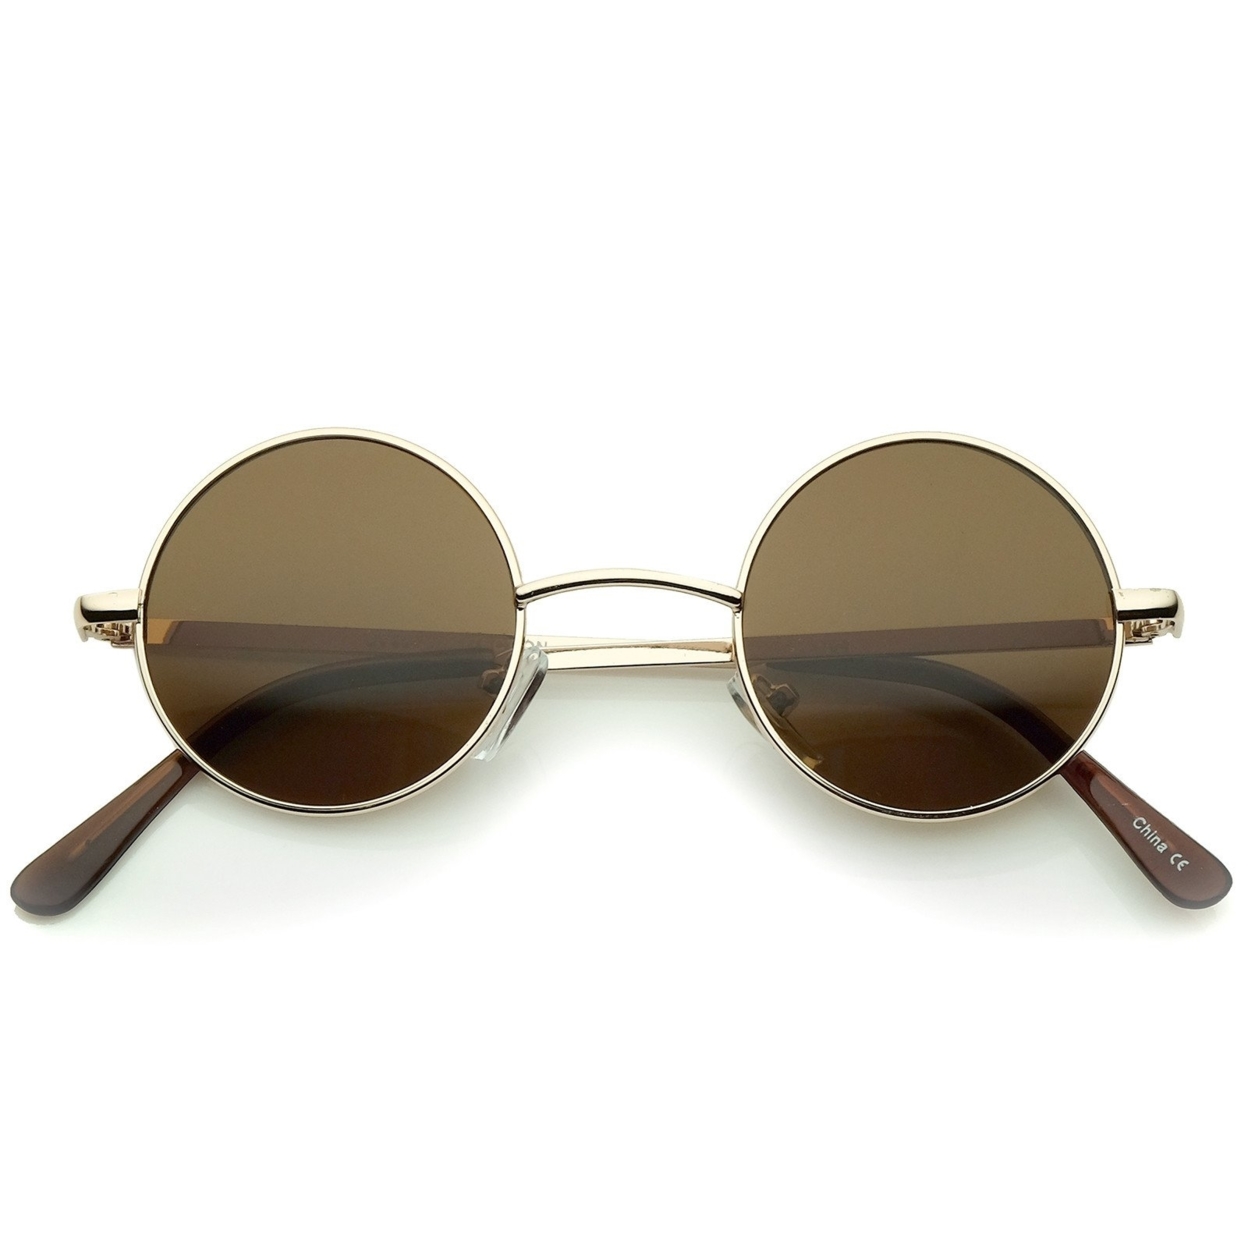 Small Retro Lennon Inspired Style Neutral-Colored Lens Round Metal Sunglasses 41mm - Gold / Amber